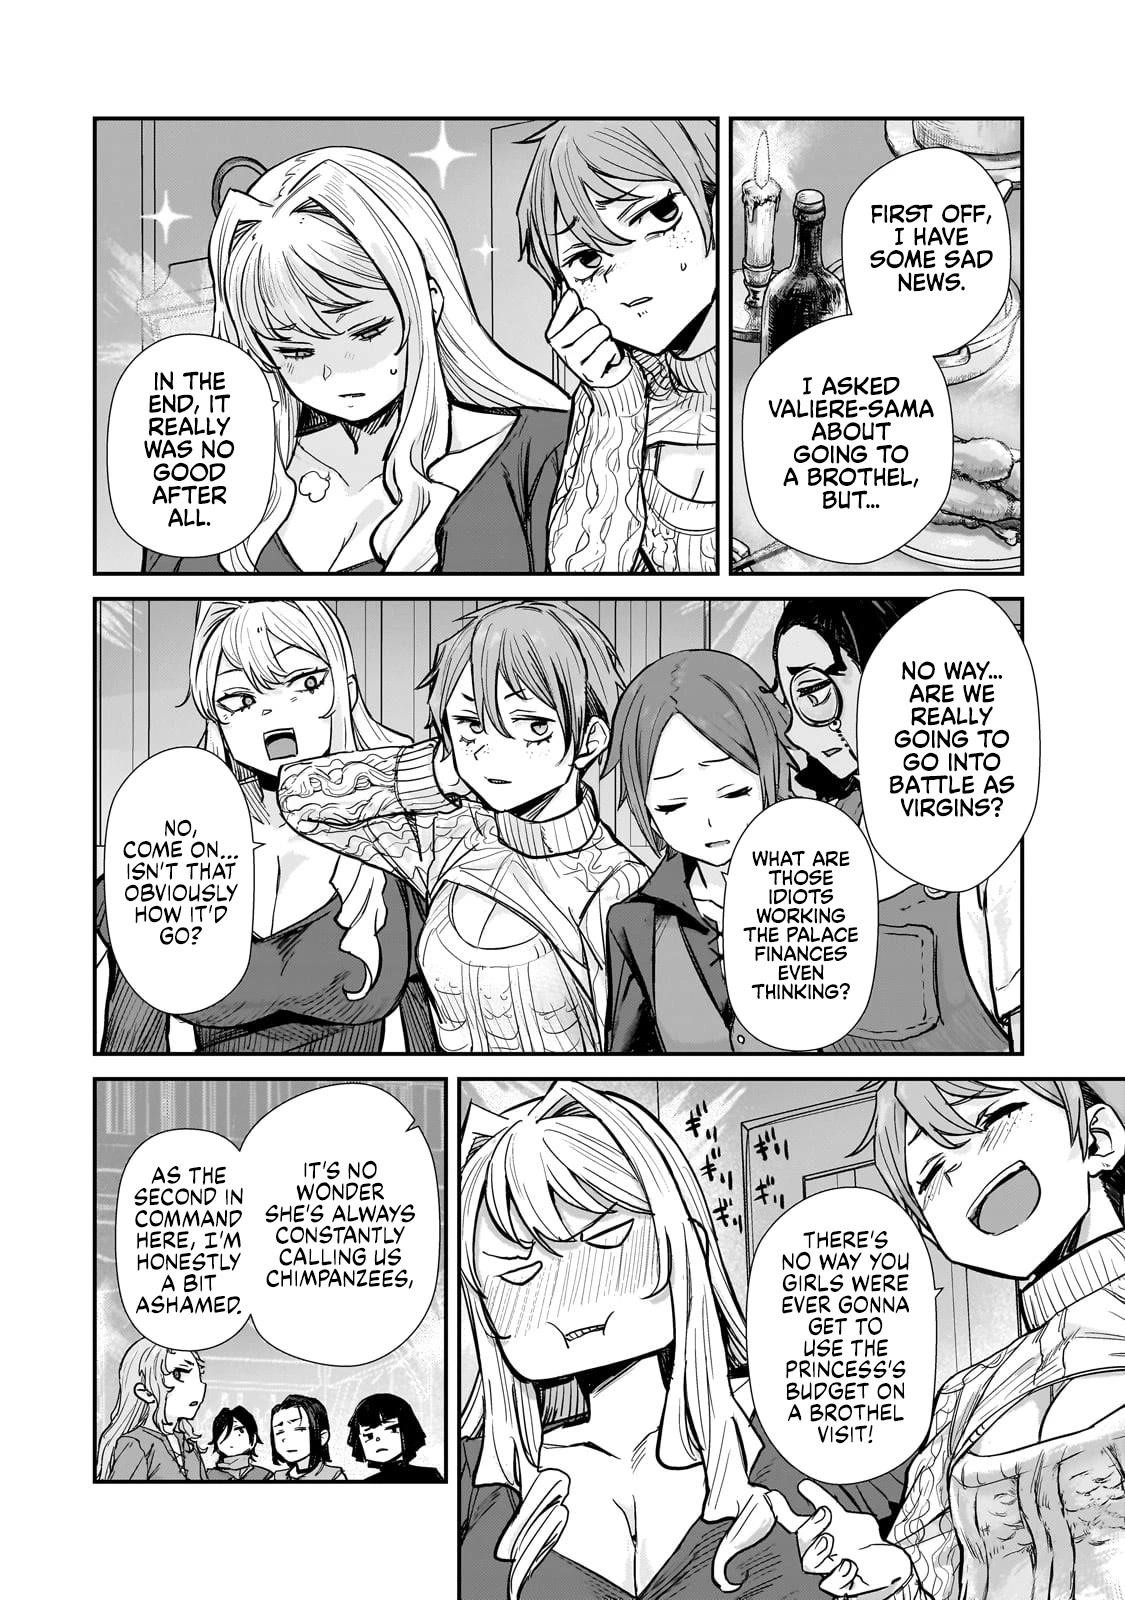 Virgin Knight Who Is The Frontier Lord In The Gender Switched World Manga 